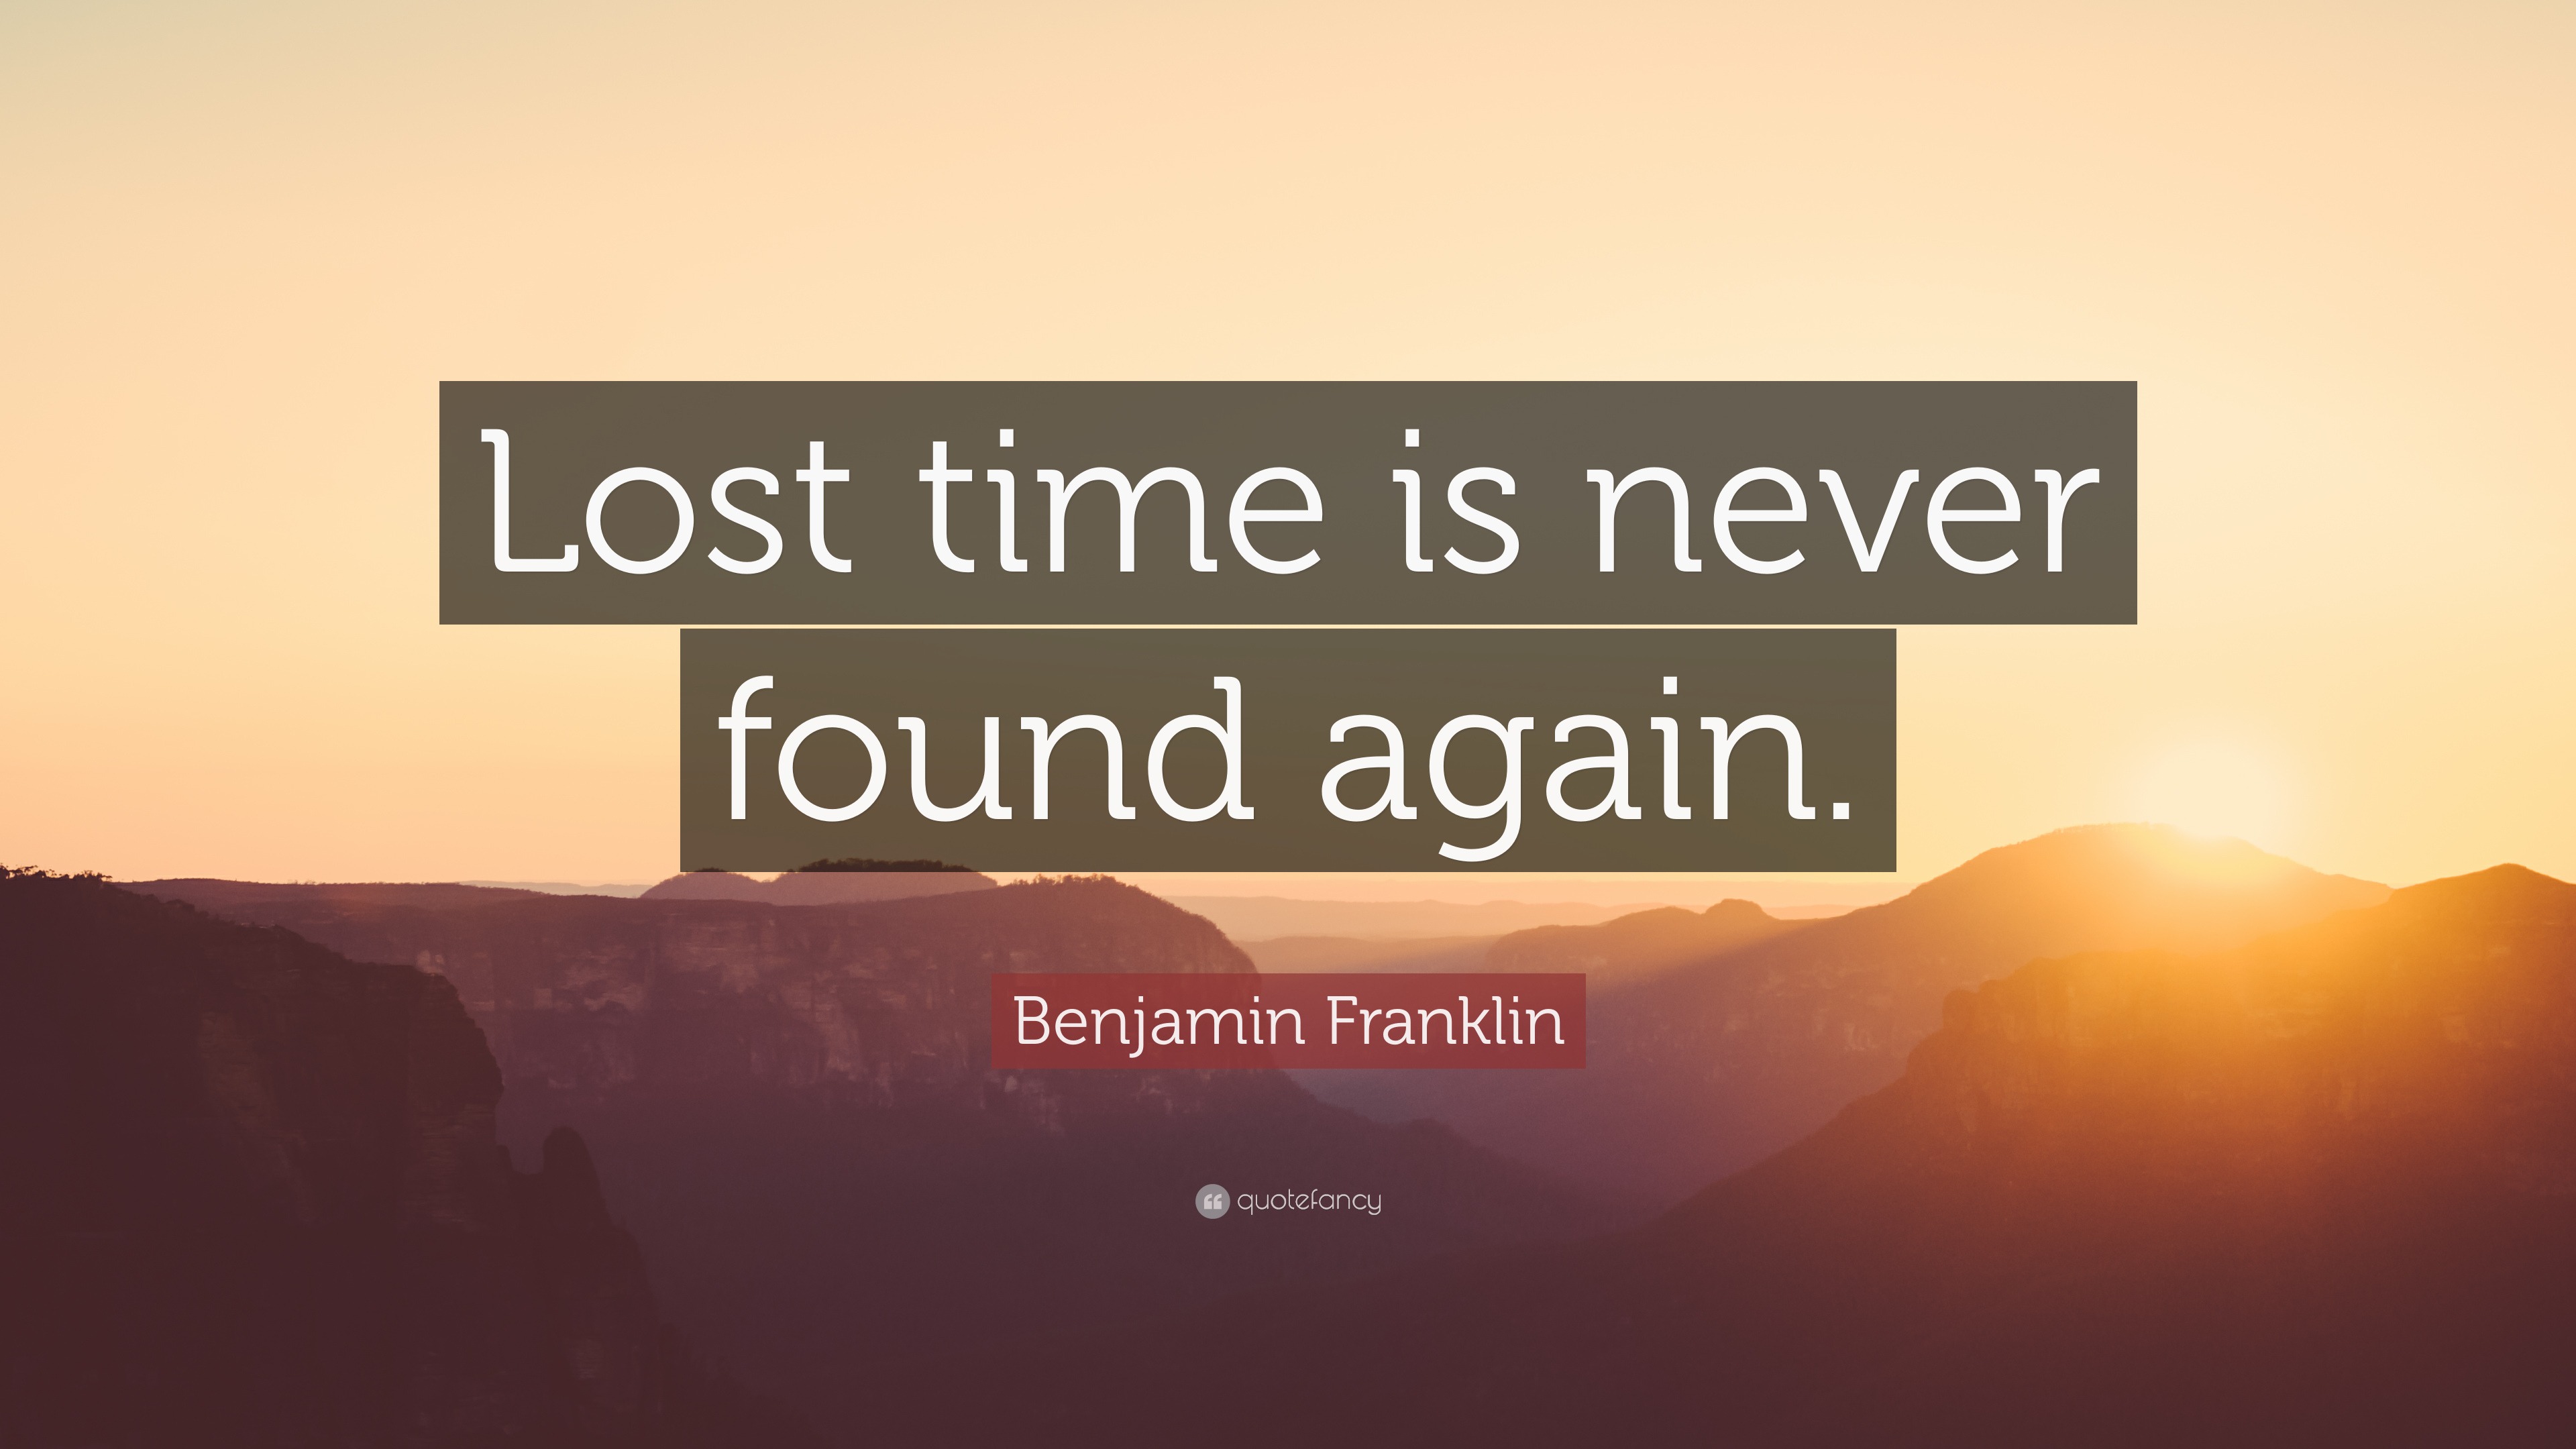 Benjamin Franklin Quote: “Lost time is never found again.” (24